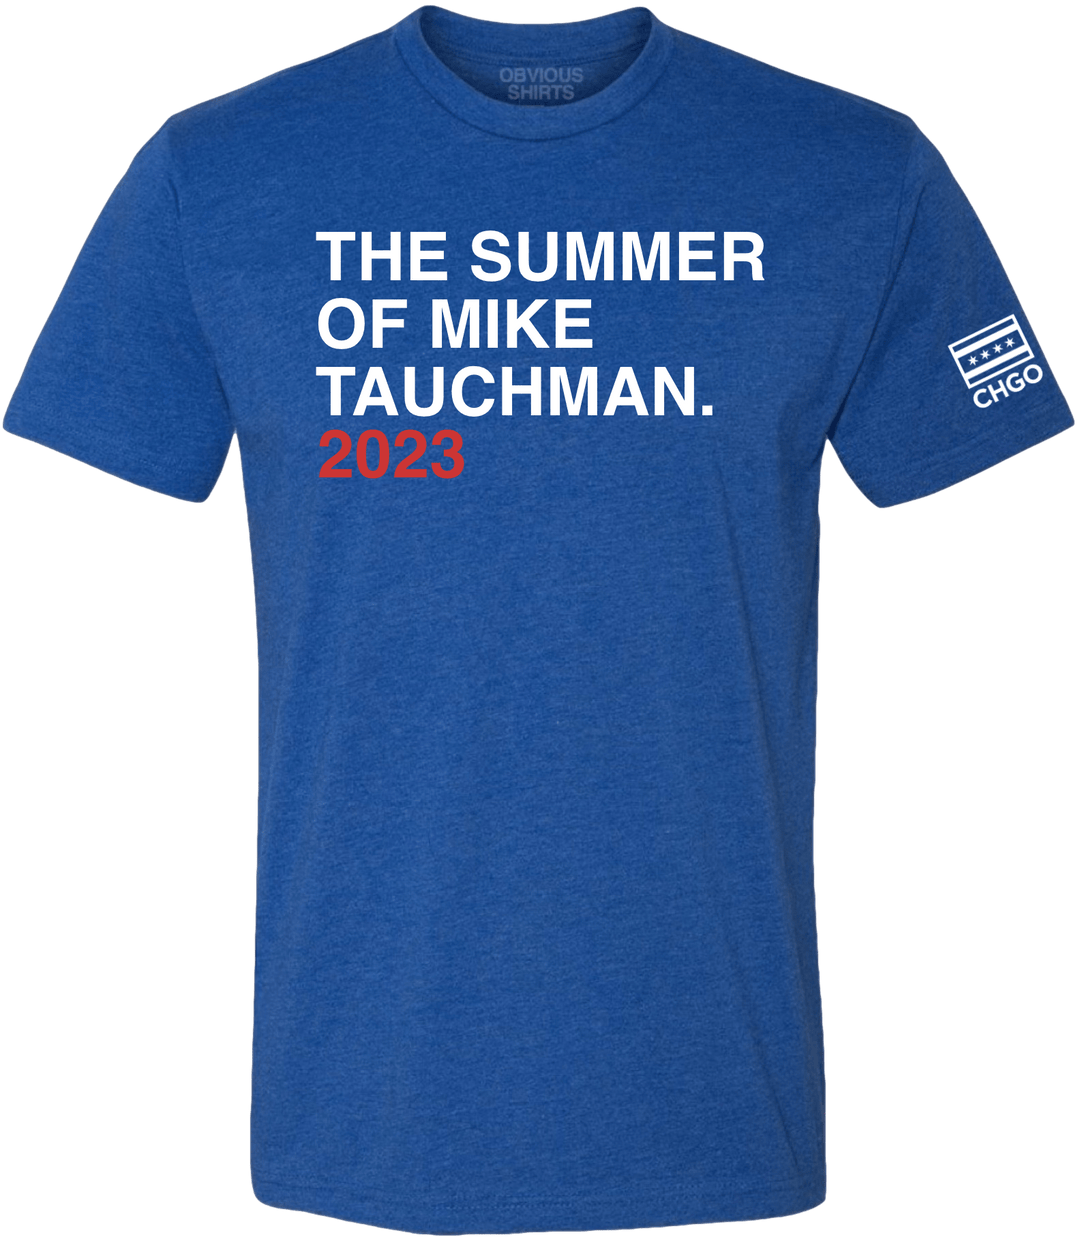 THE SUMMER OF MIKE TAUCHMAN. (TEXT) - OBVIOUS SHIRTS